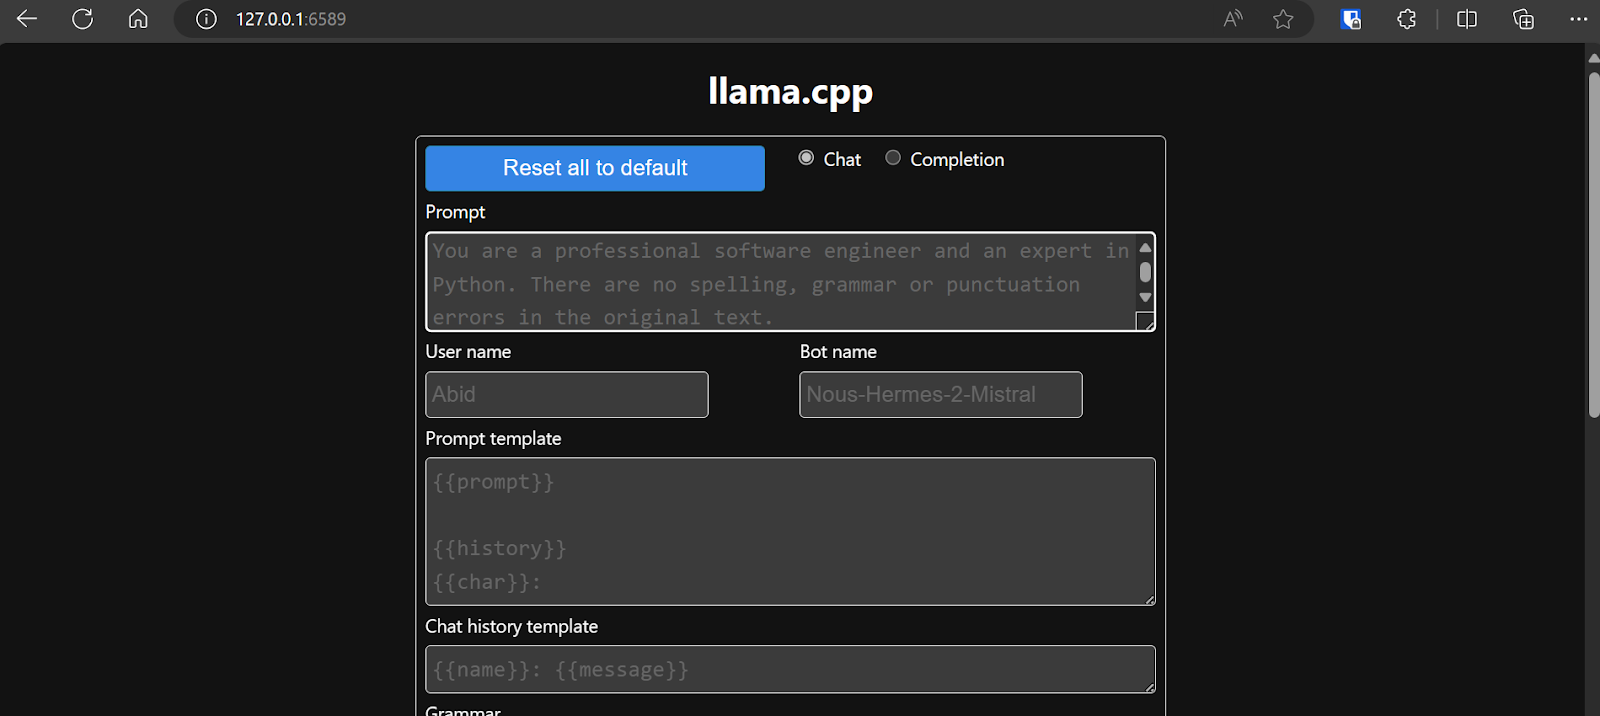 llama.cpp web app running in the browser